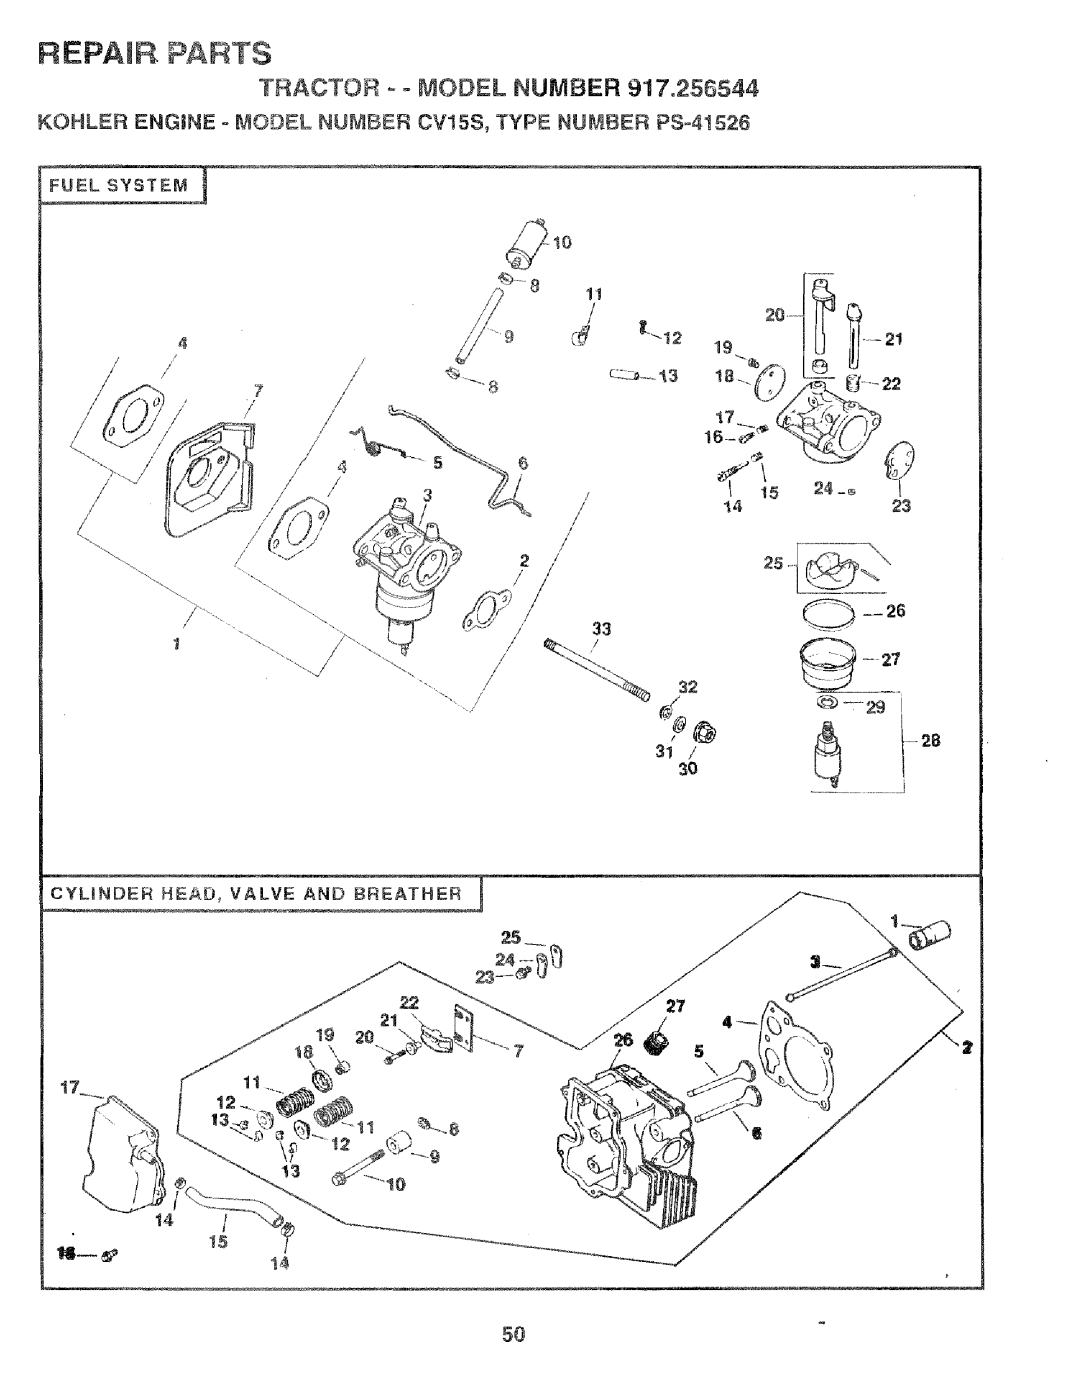 Craftsman 917.256544 owner manual Tractor - = Model Number, 24 __, 26 27, _5--- 29, REPAmR PARTS, Fuel System, 19 18-._ 